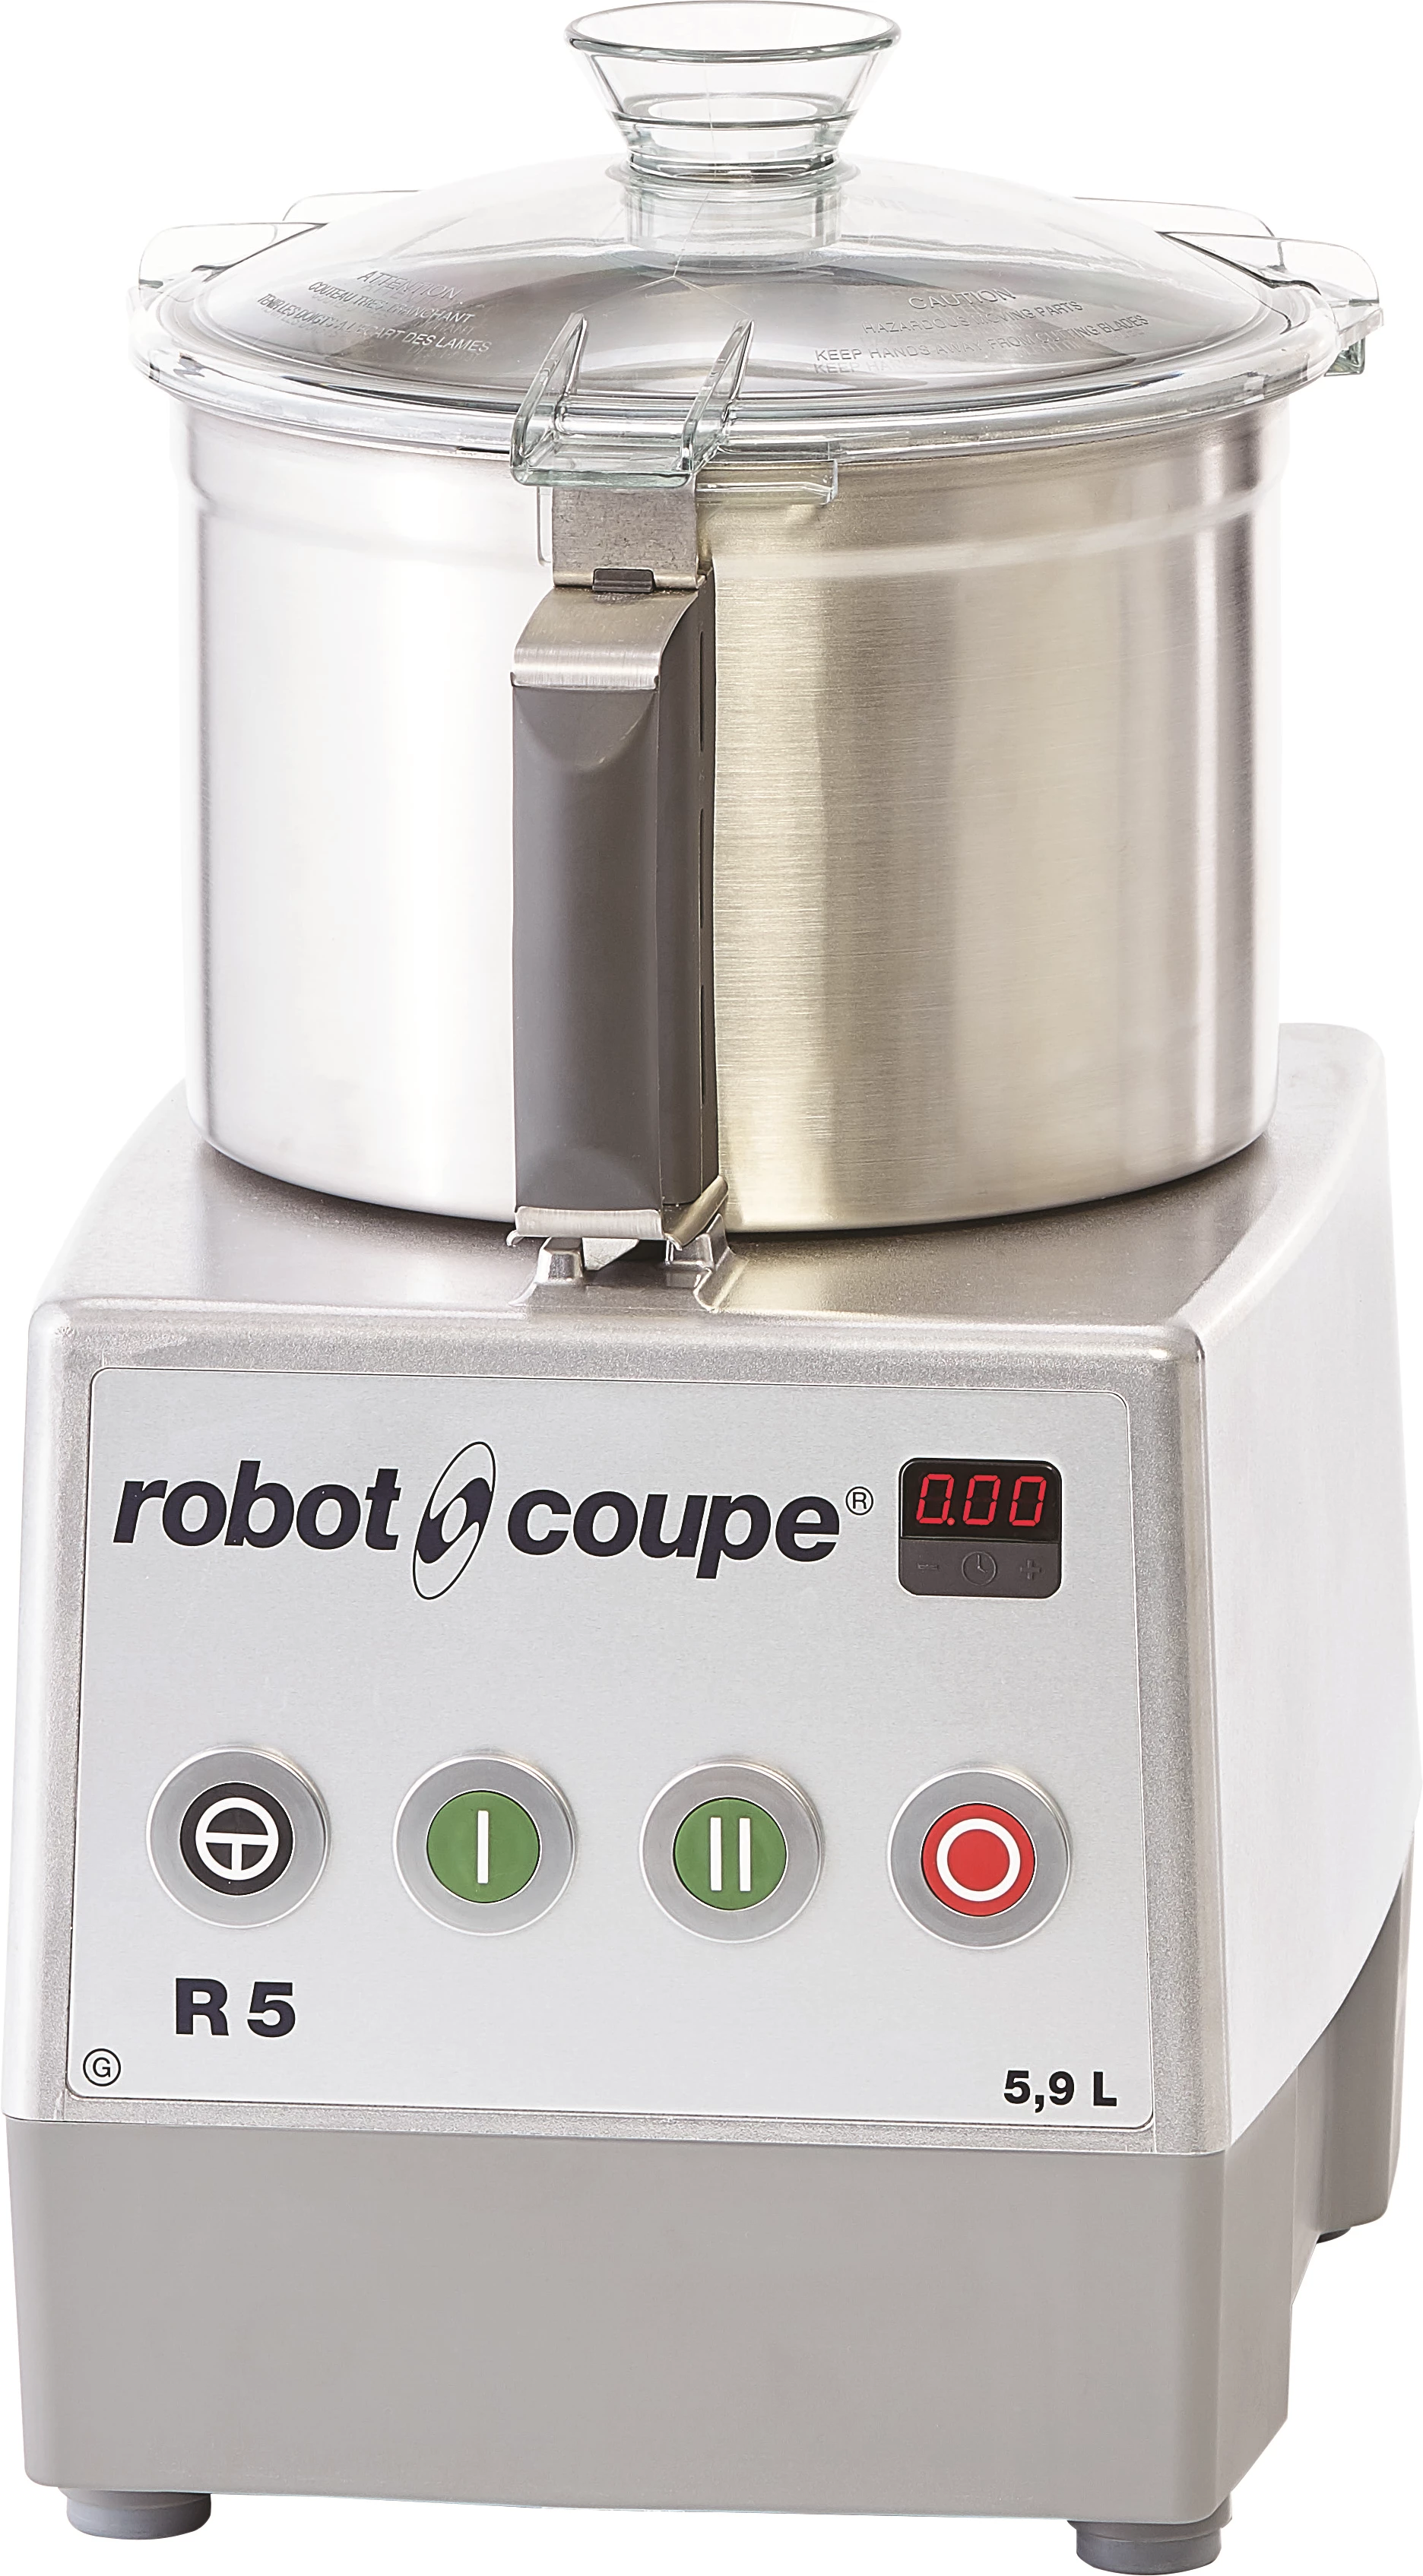 Robot Coupe R5 G Plus cutter